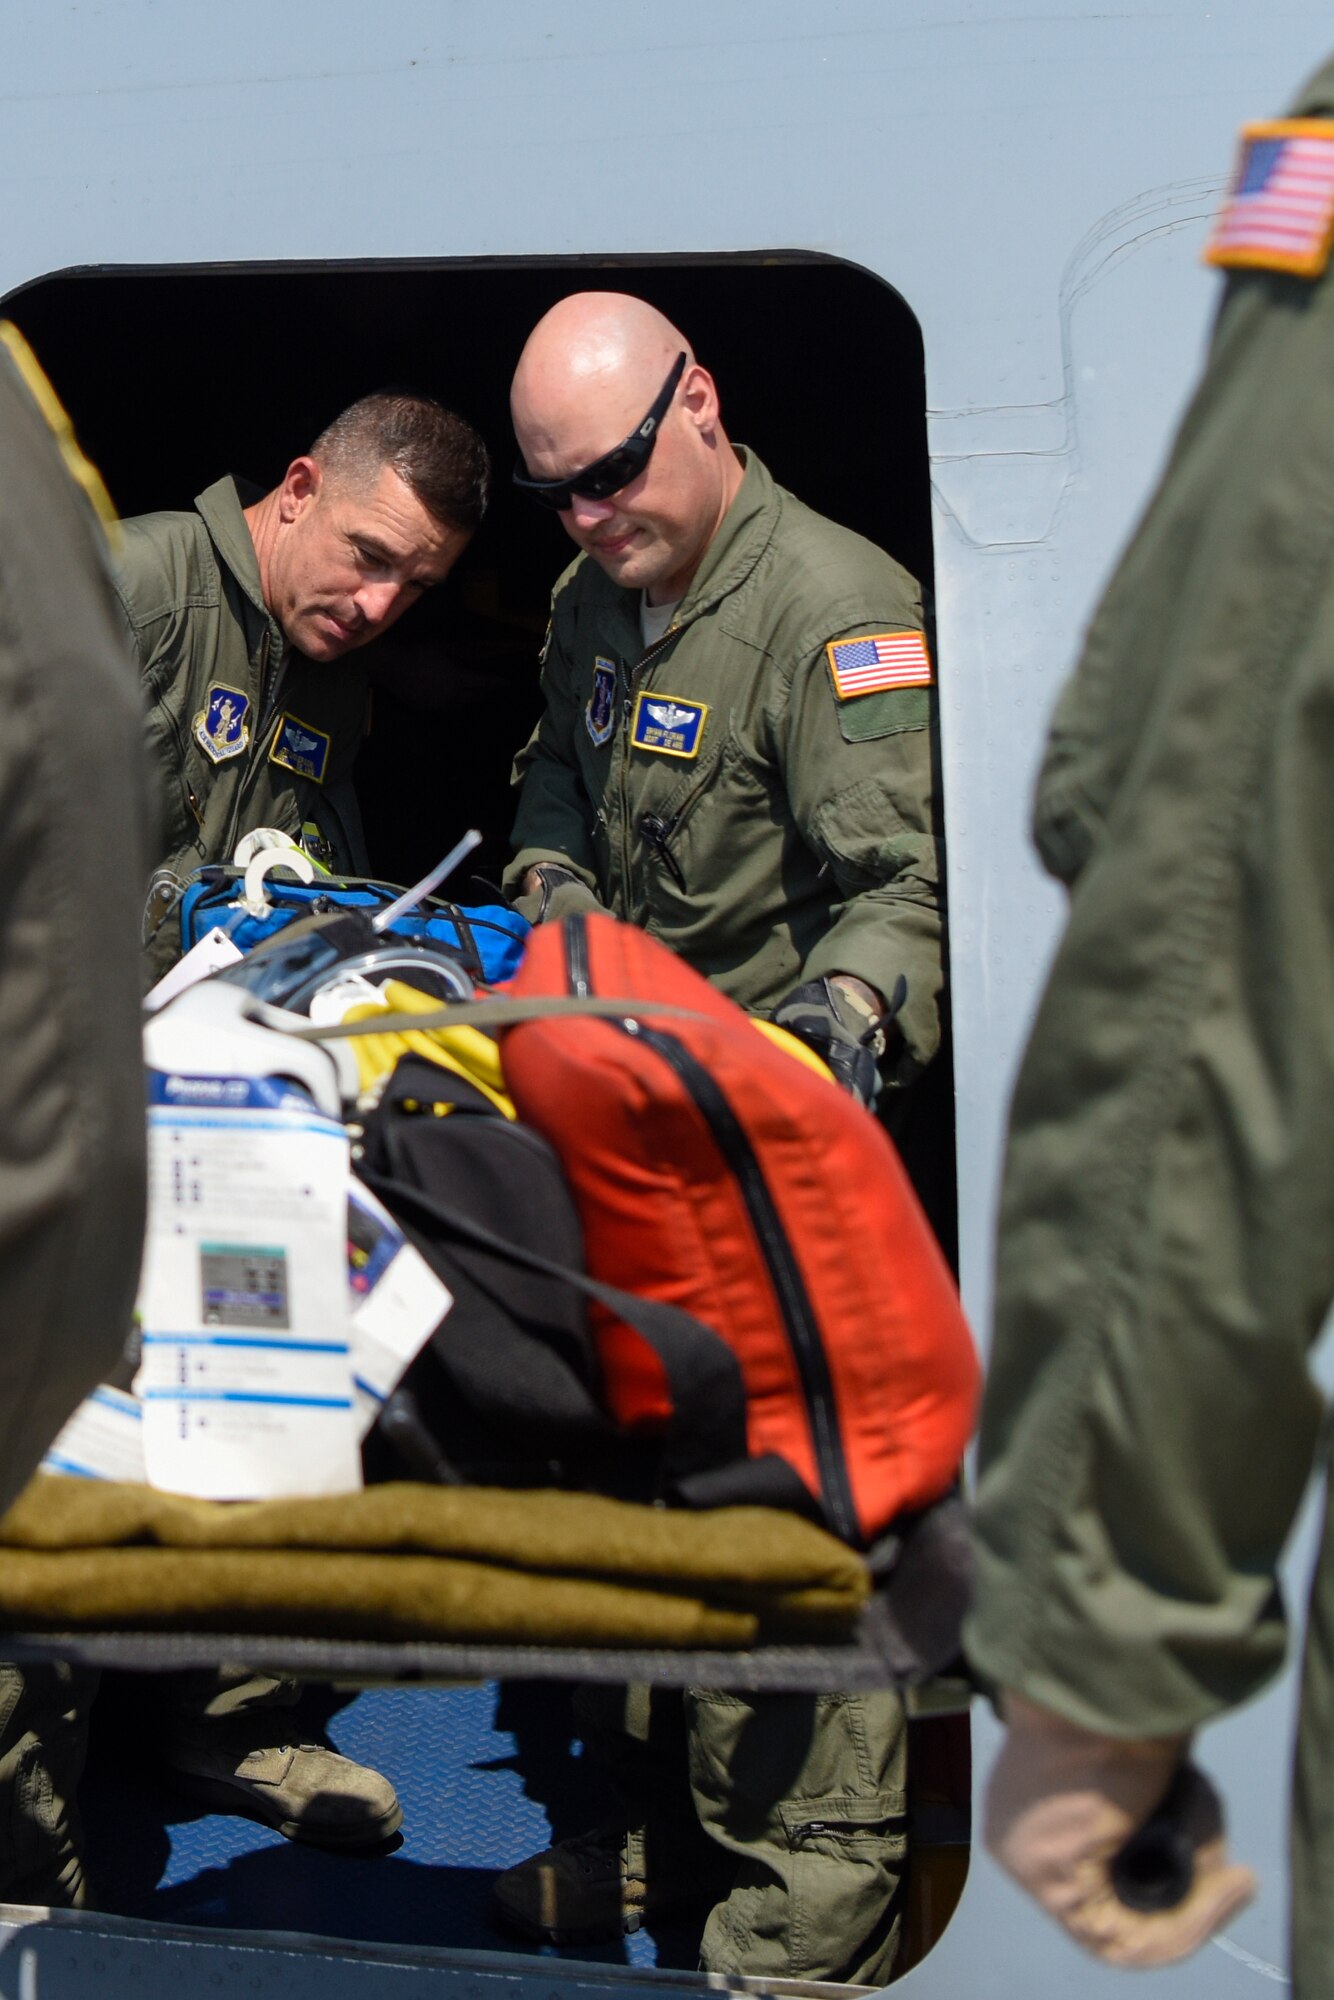 Airmen assigned to the Delaware Air National Guard 142nd Aeromedical Evacuation Squadron load the emergency equipment litter into the troop compartment from a lift truck July 12, 2018, at Dover Air Force Base, Del. The life-saving equipment on the litter is used for monitoring heart rate and vital signs, and can also defibrillate a heart if needed. The 142nd AES is stationed at New Castle Air National Guard Base, Del. (U.S. Air Force photo by Airman 1st Class Zoe M. Wockenfuss)